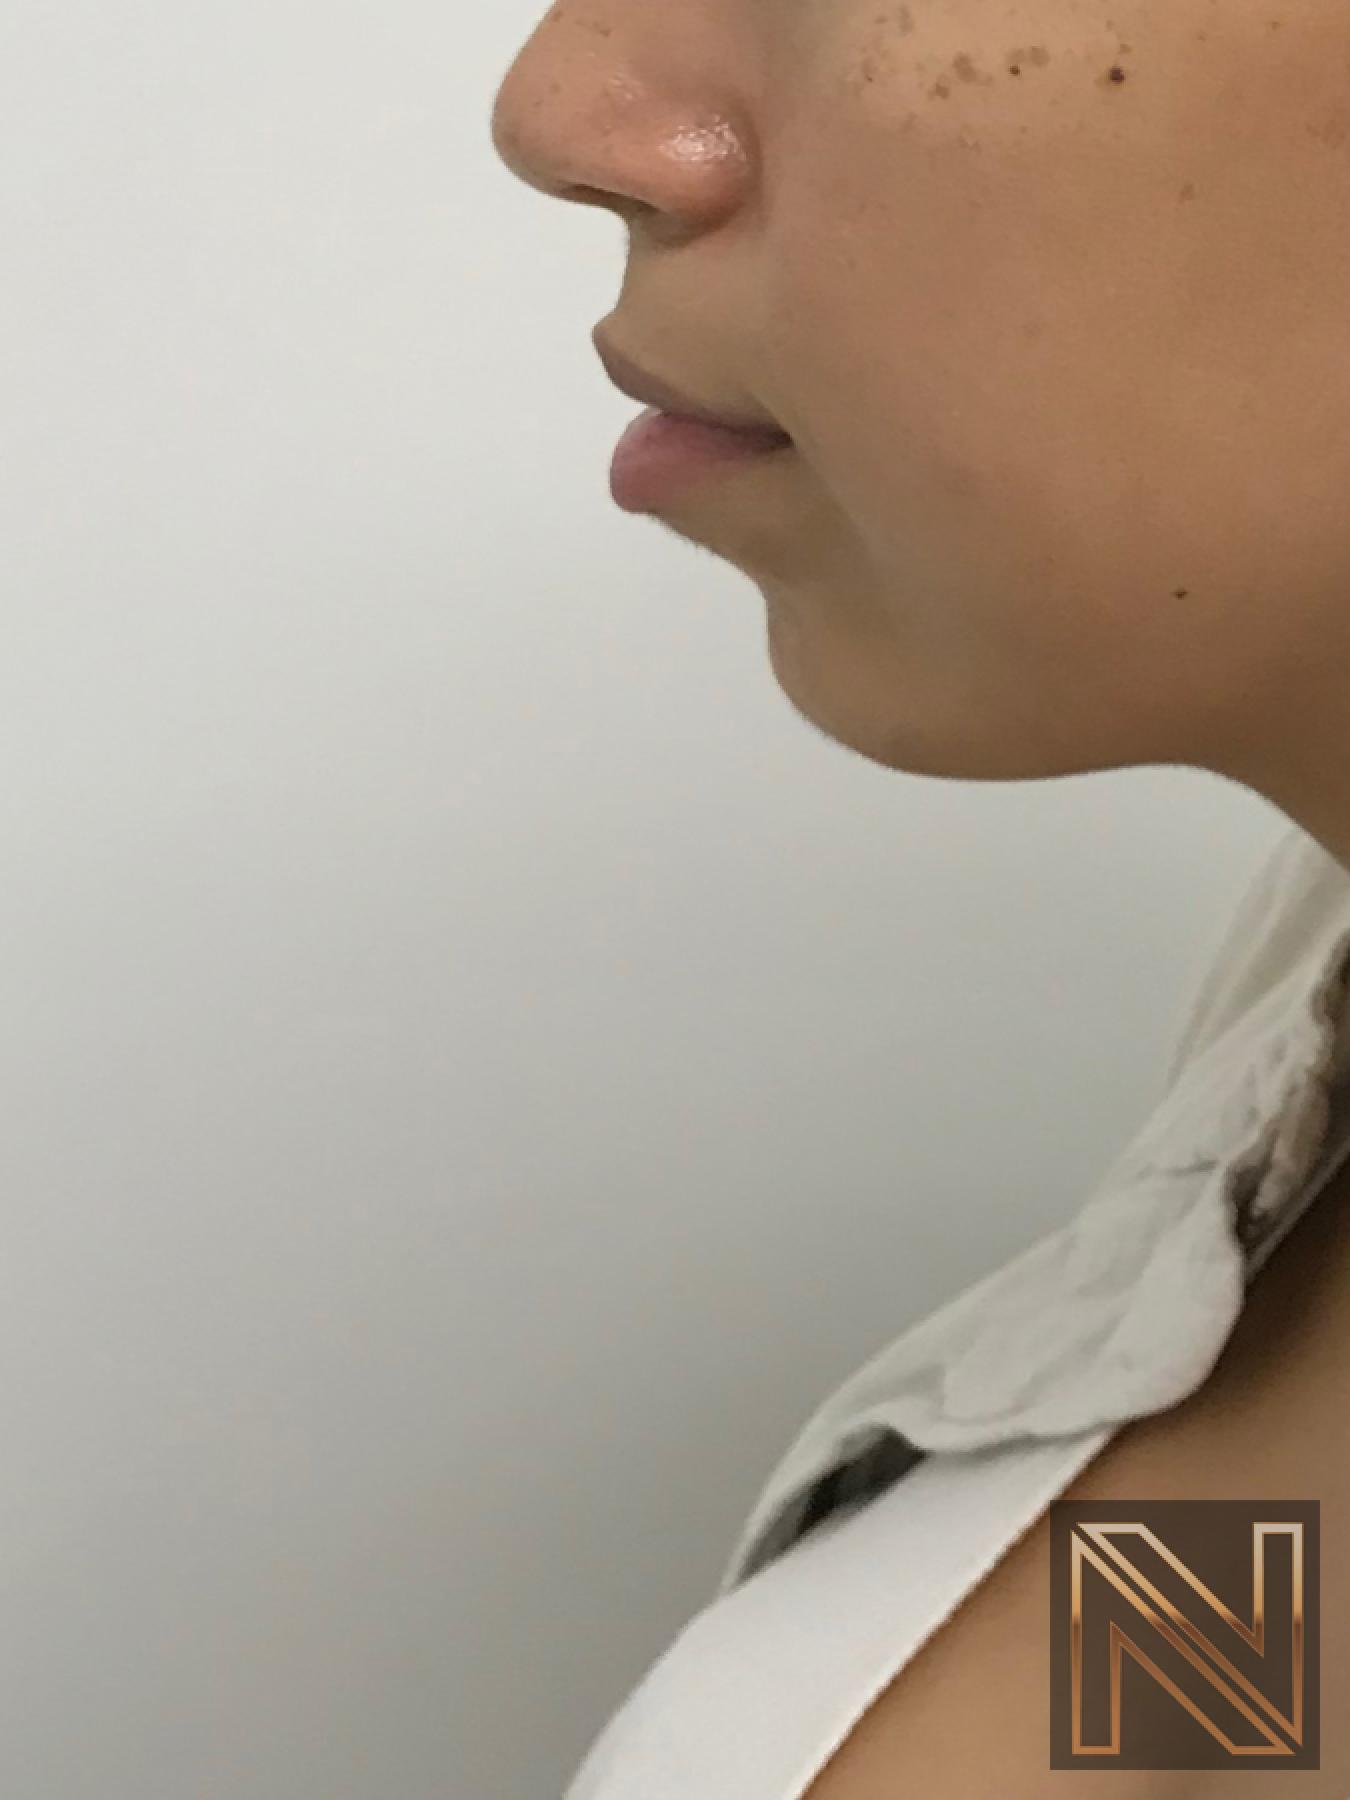 Chin Augmentation: Patient 1 - After 2